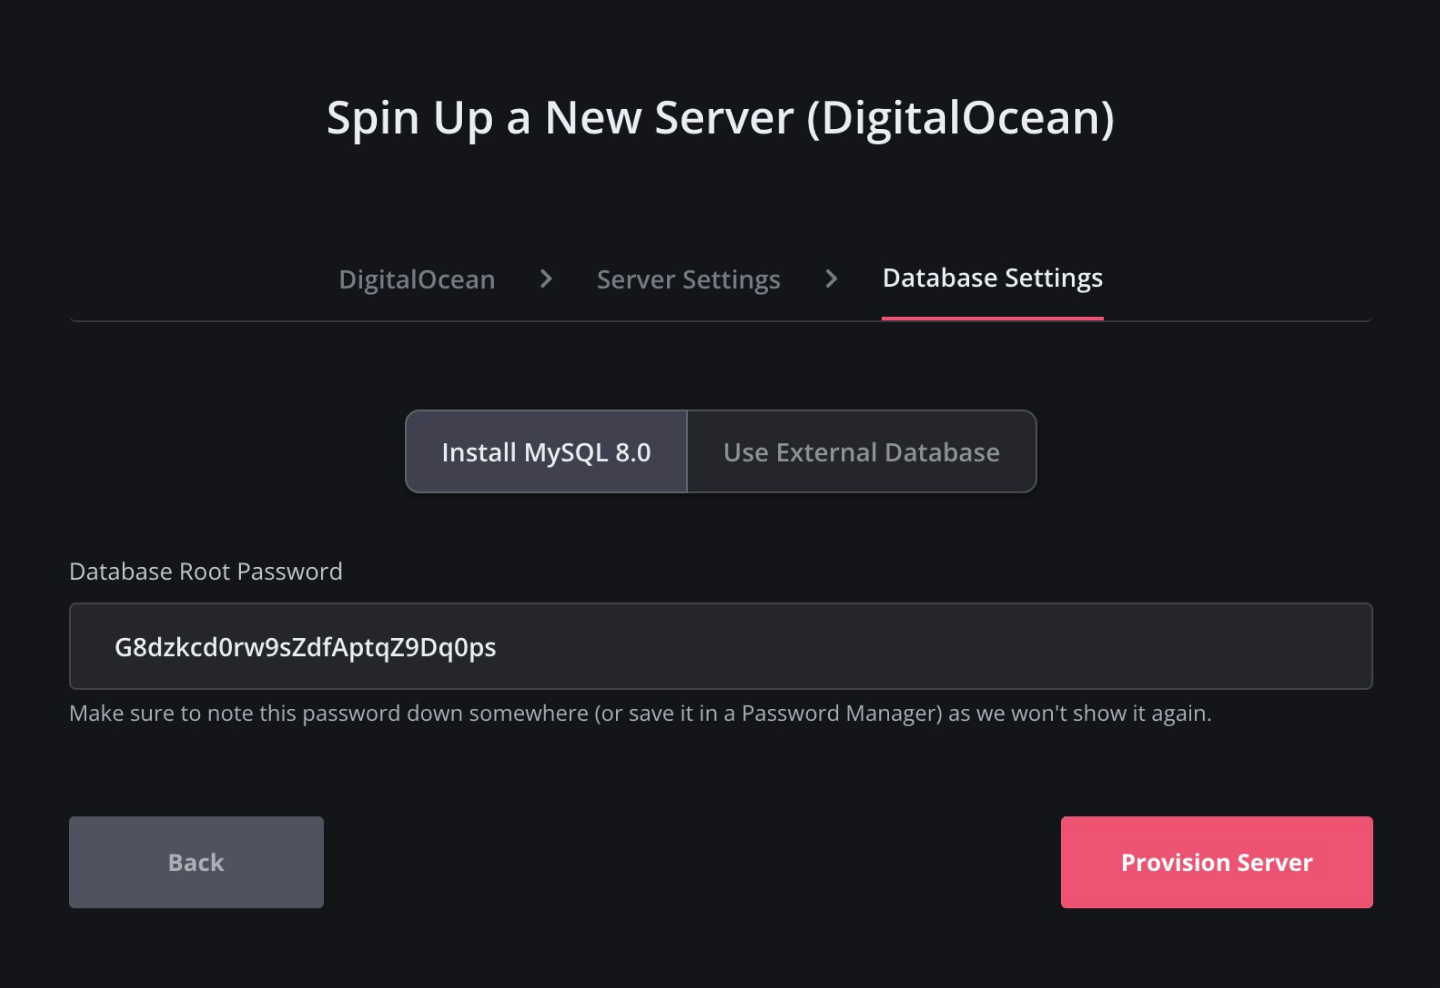 Connect SpinupWP to your new DigitalOcean server